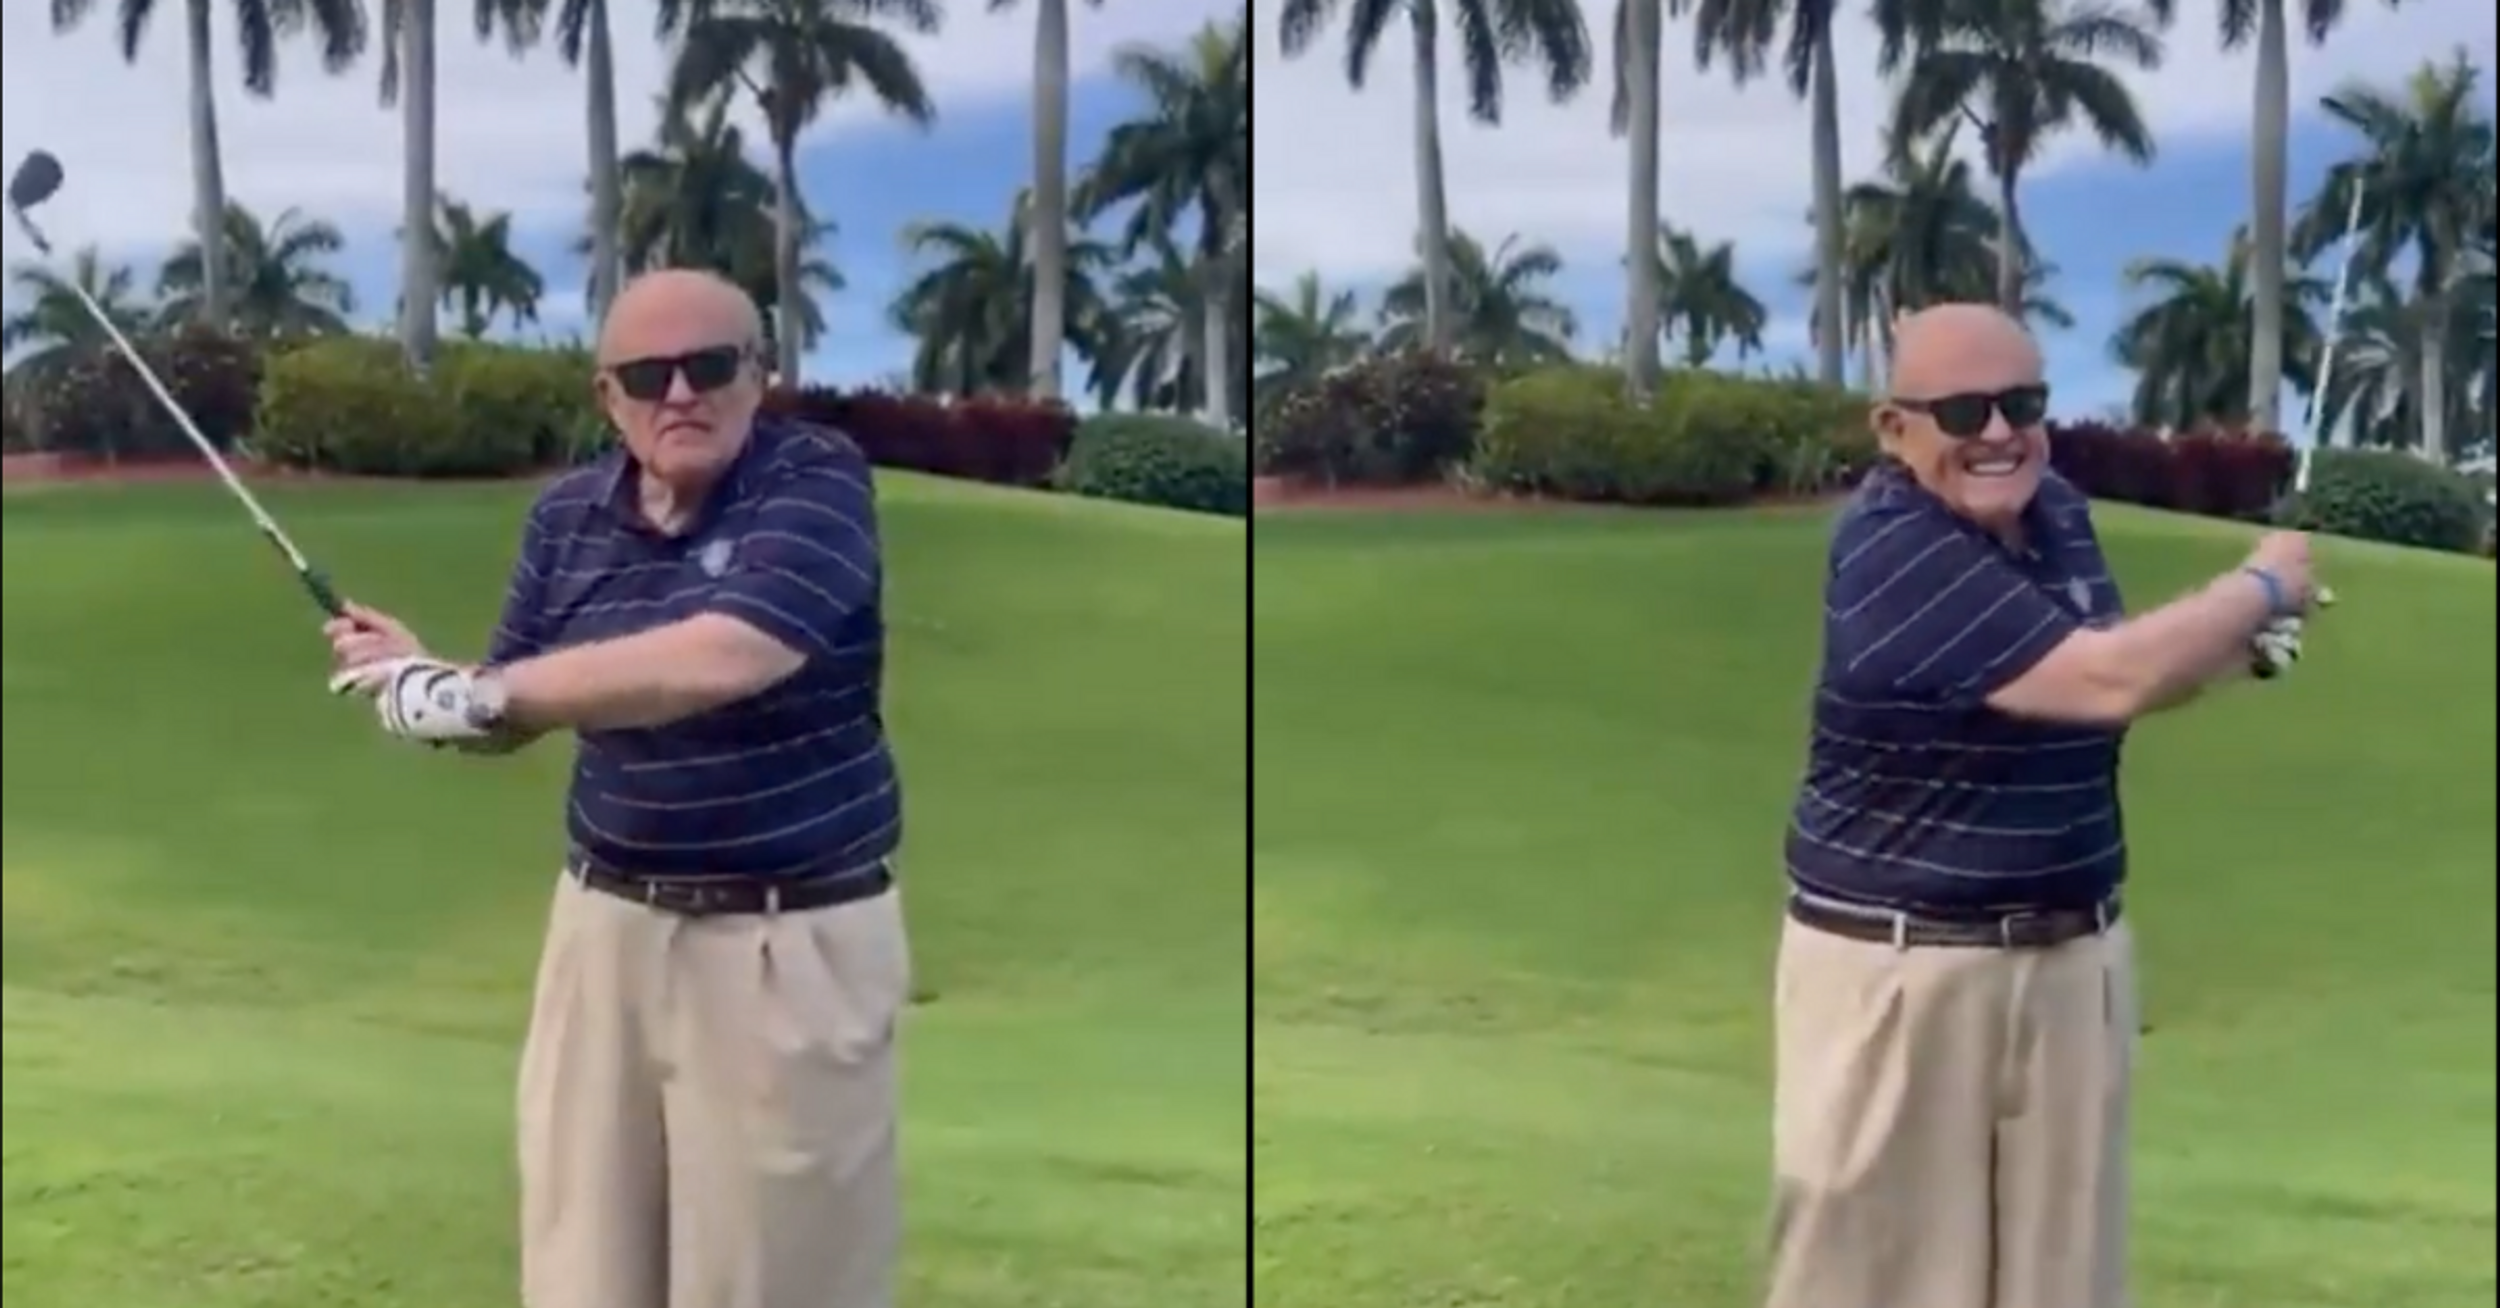 Giuliani Roasted After Tweeting And Deleting Cringey Golf Video Promoting His Cameo Page